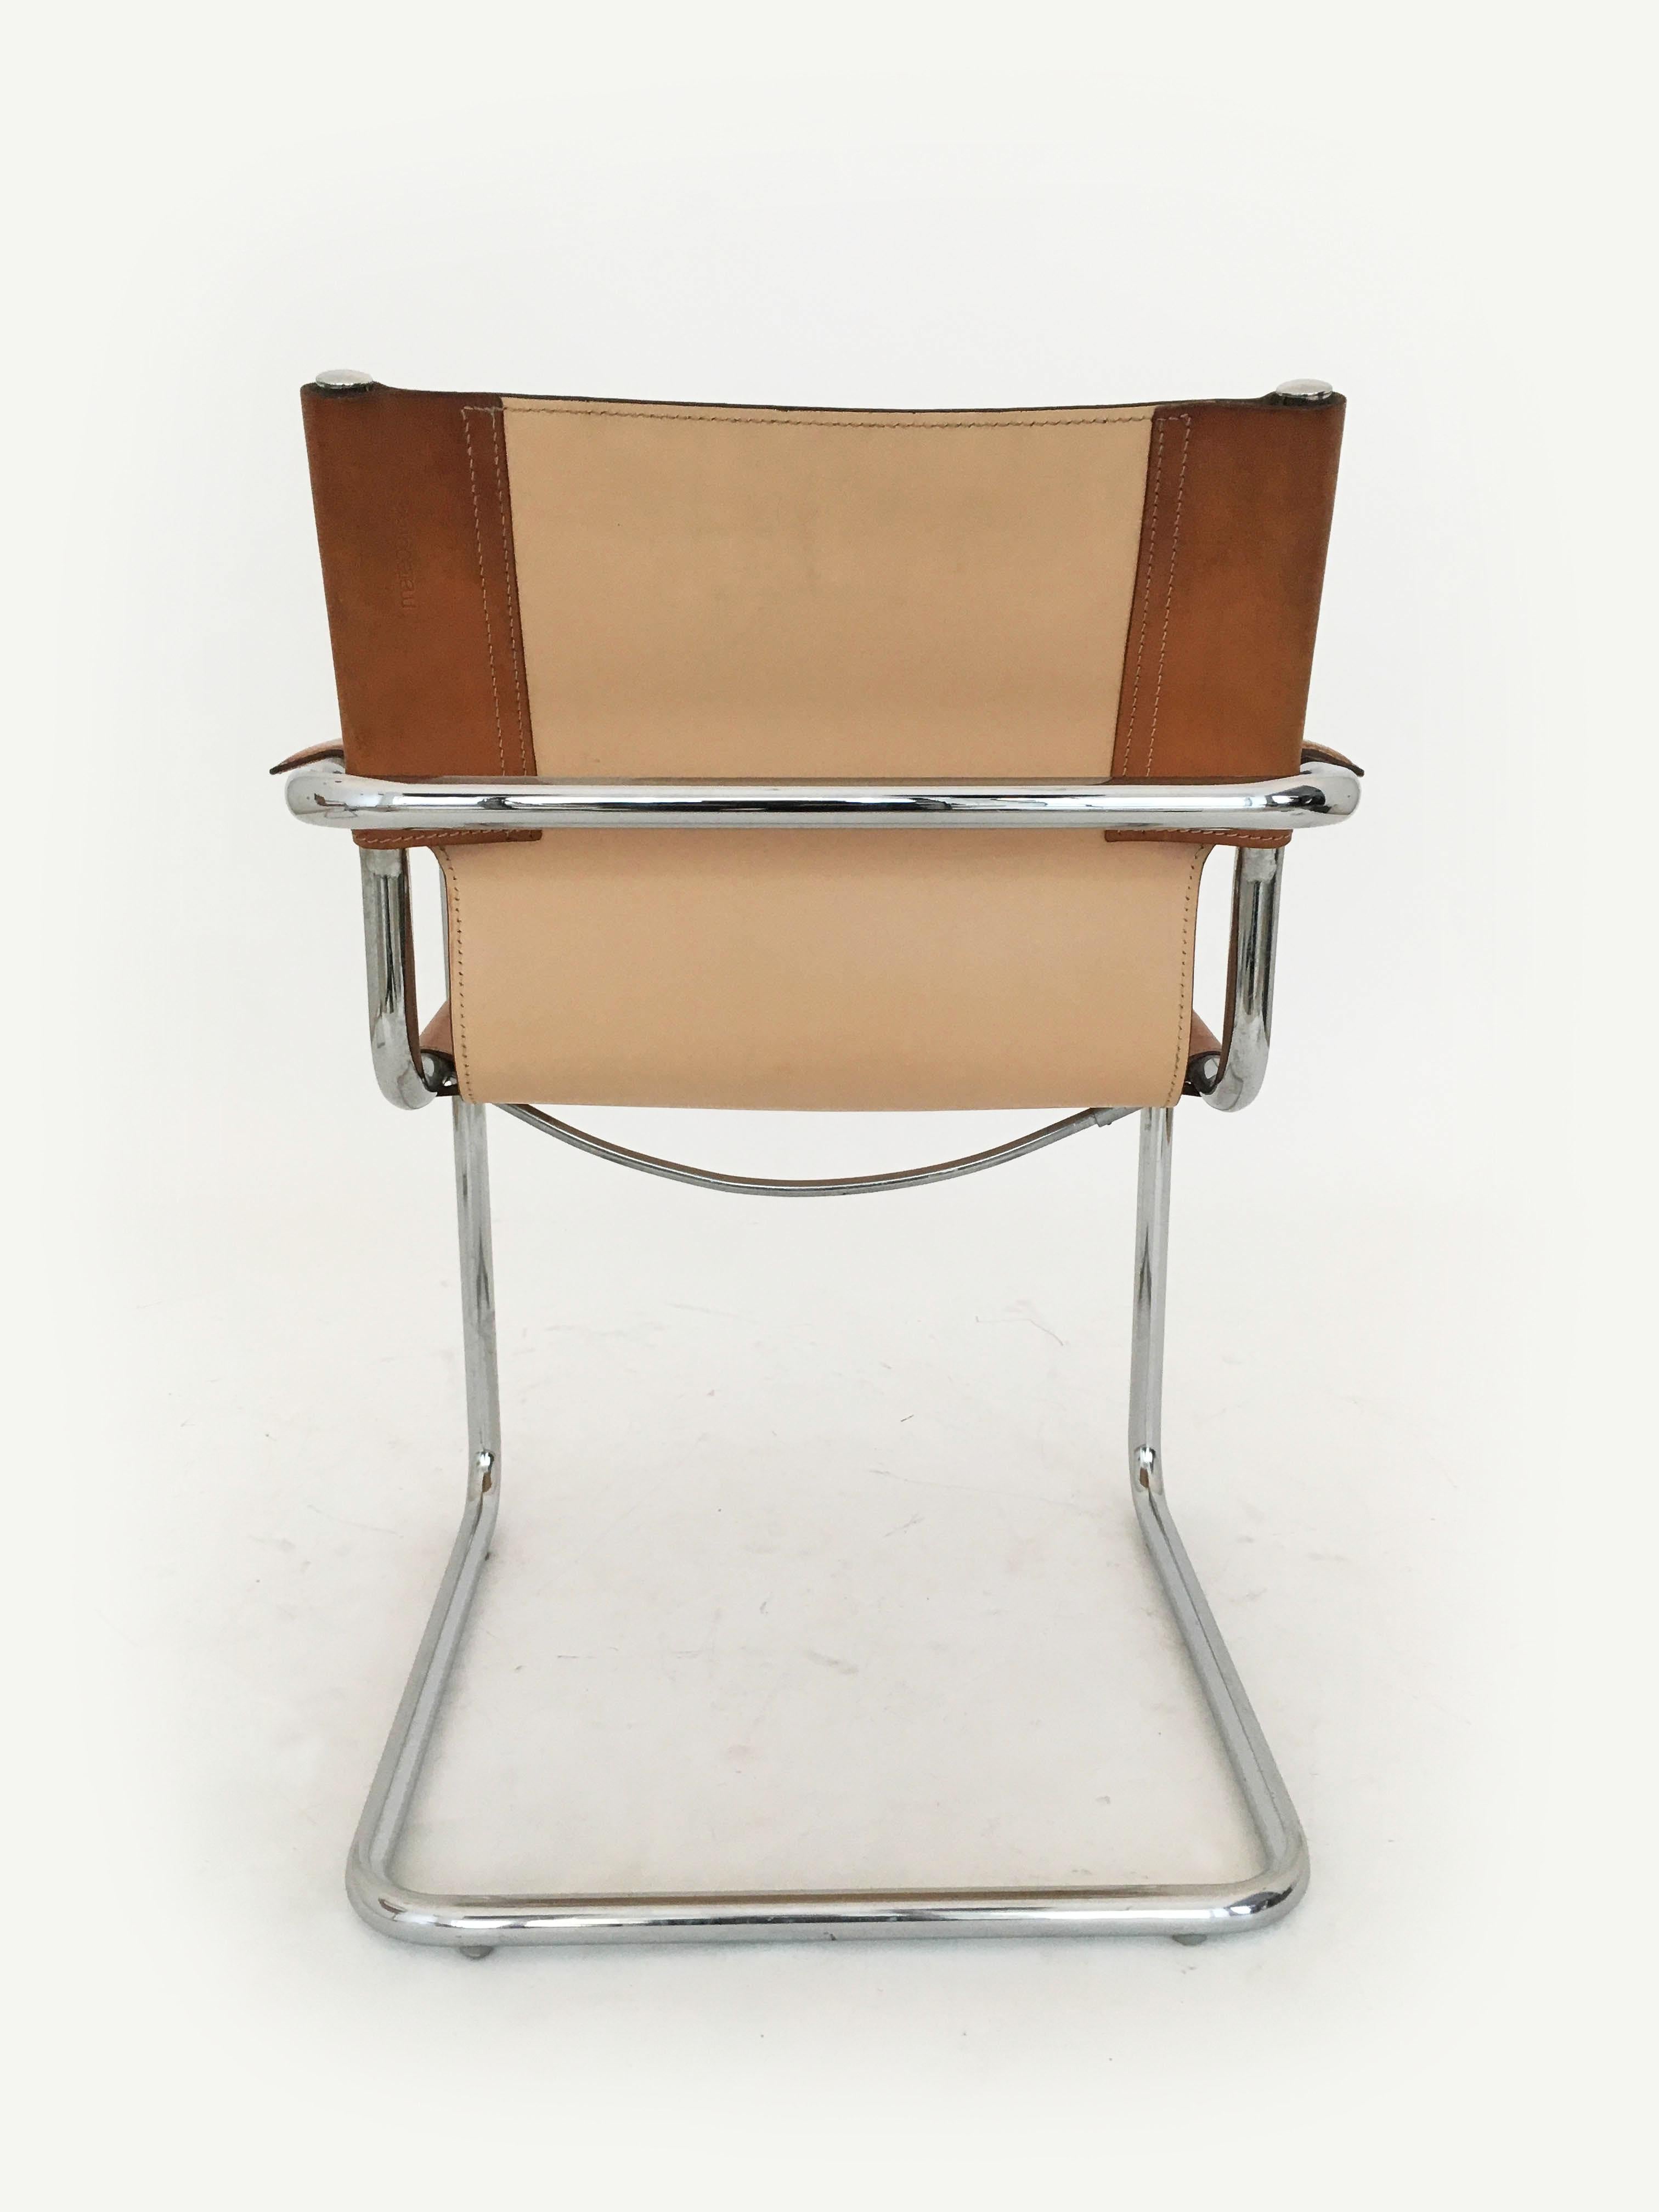 20th Century Matteo Grassi Cantilever Visitor Side Chairs Pair, Italy, 1970s For Sale